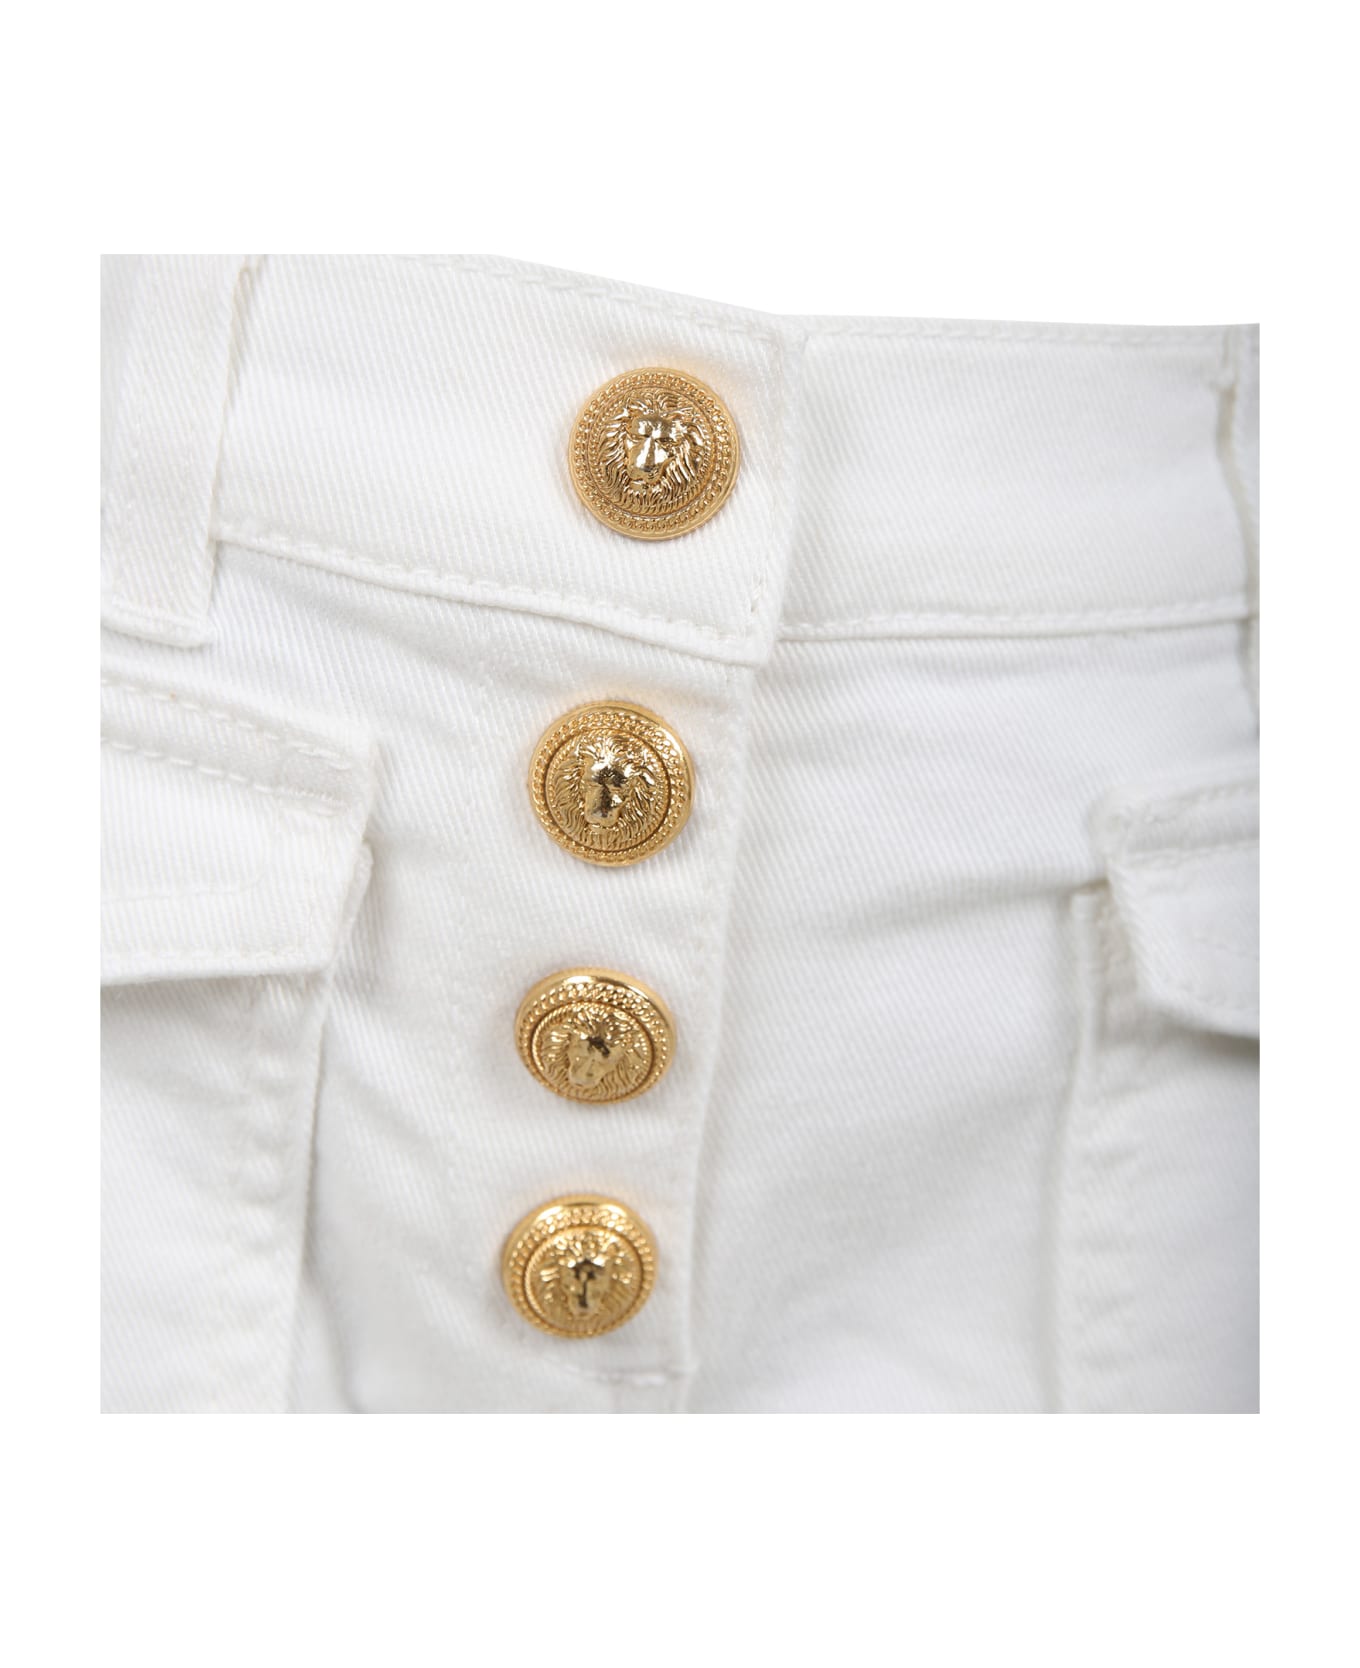 Balmain White Jeans For Girl With Gold Buttons - Bianco/oro